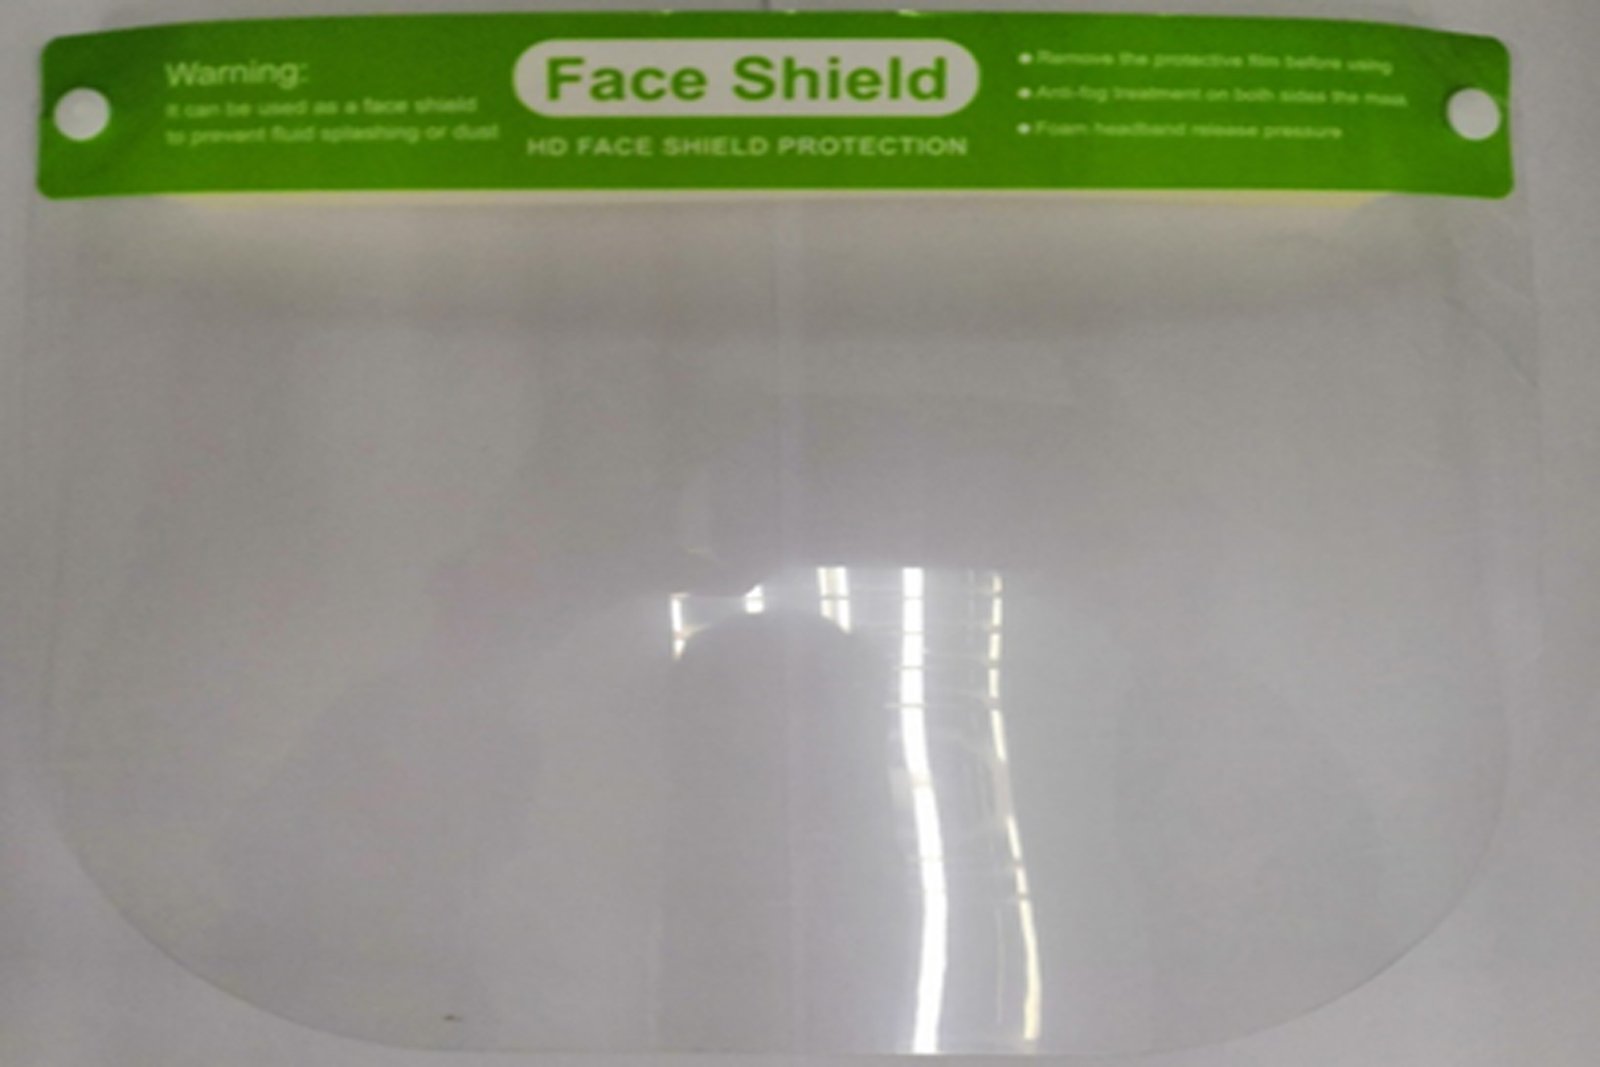 Face shield after assembled